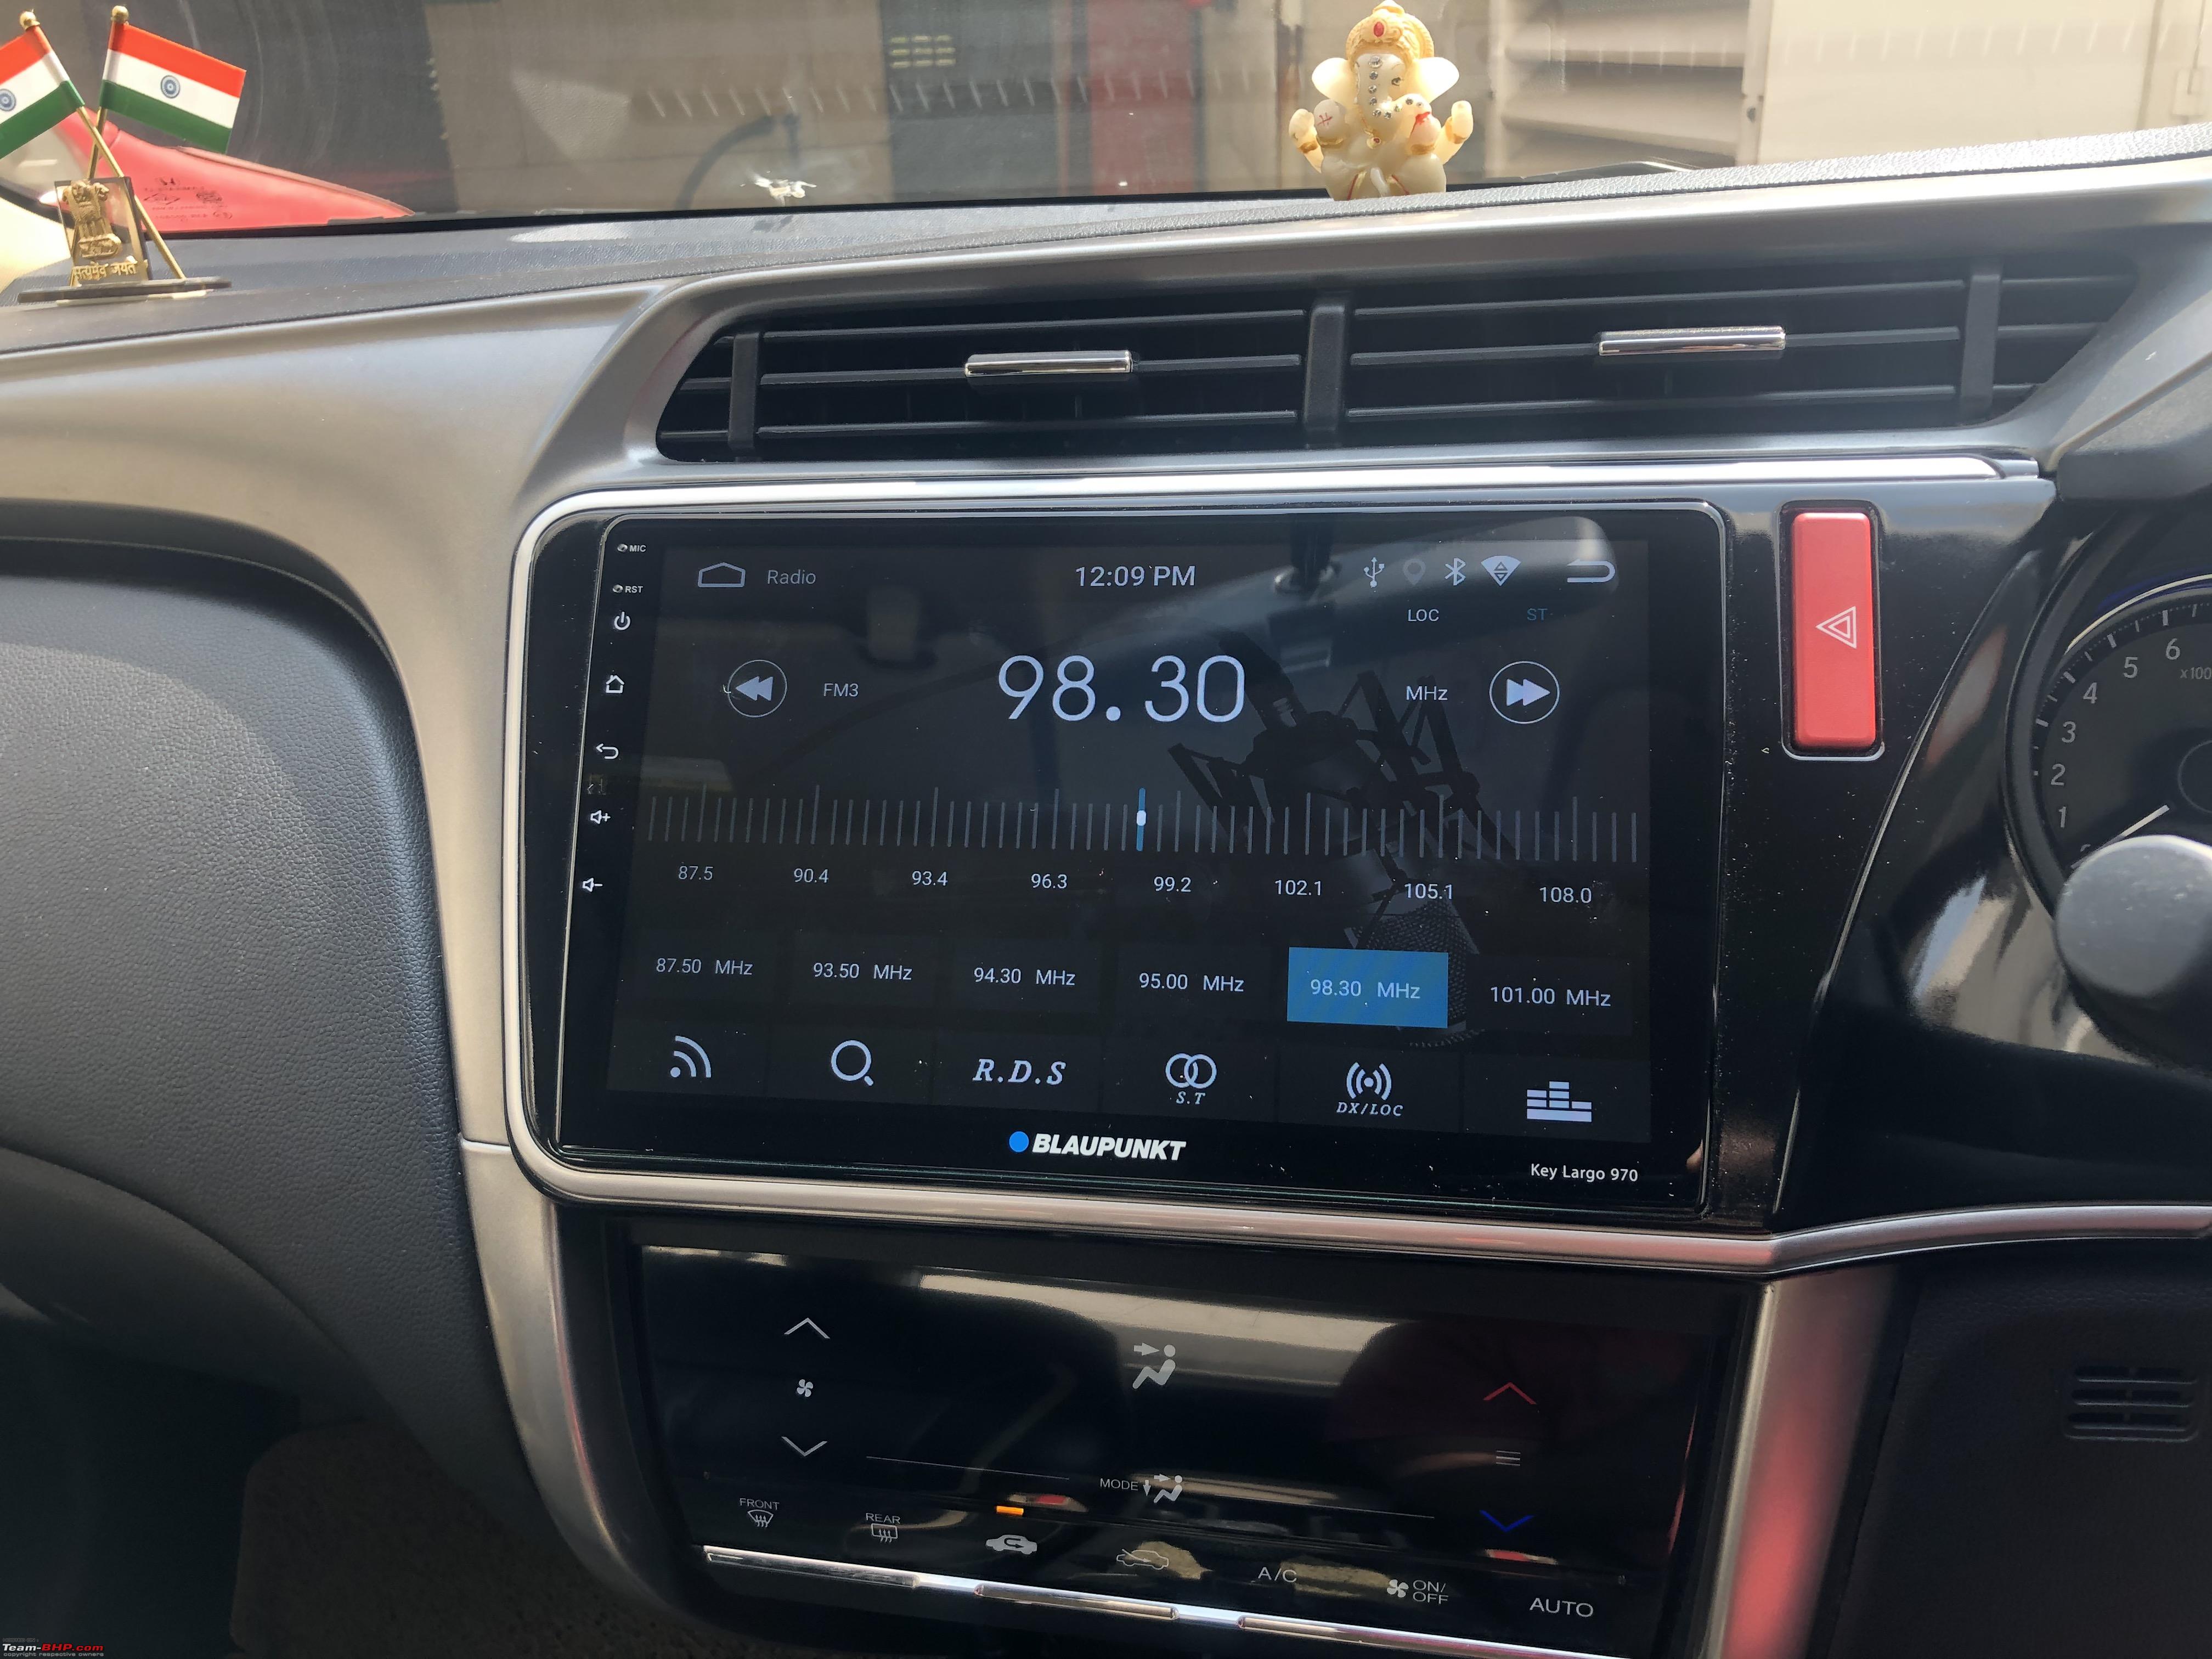 HOW TO INSTALL APPLE CARPLAY(ANDROID AUTO) ON YOUR ANDROID HEAD